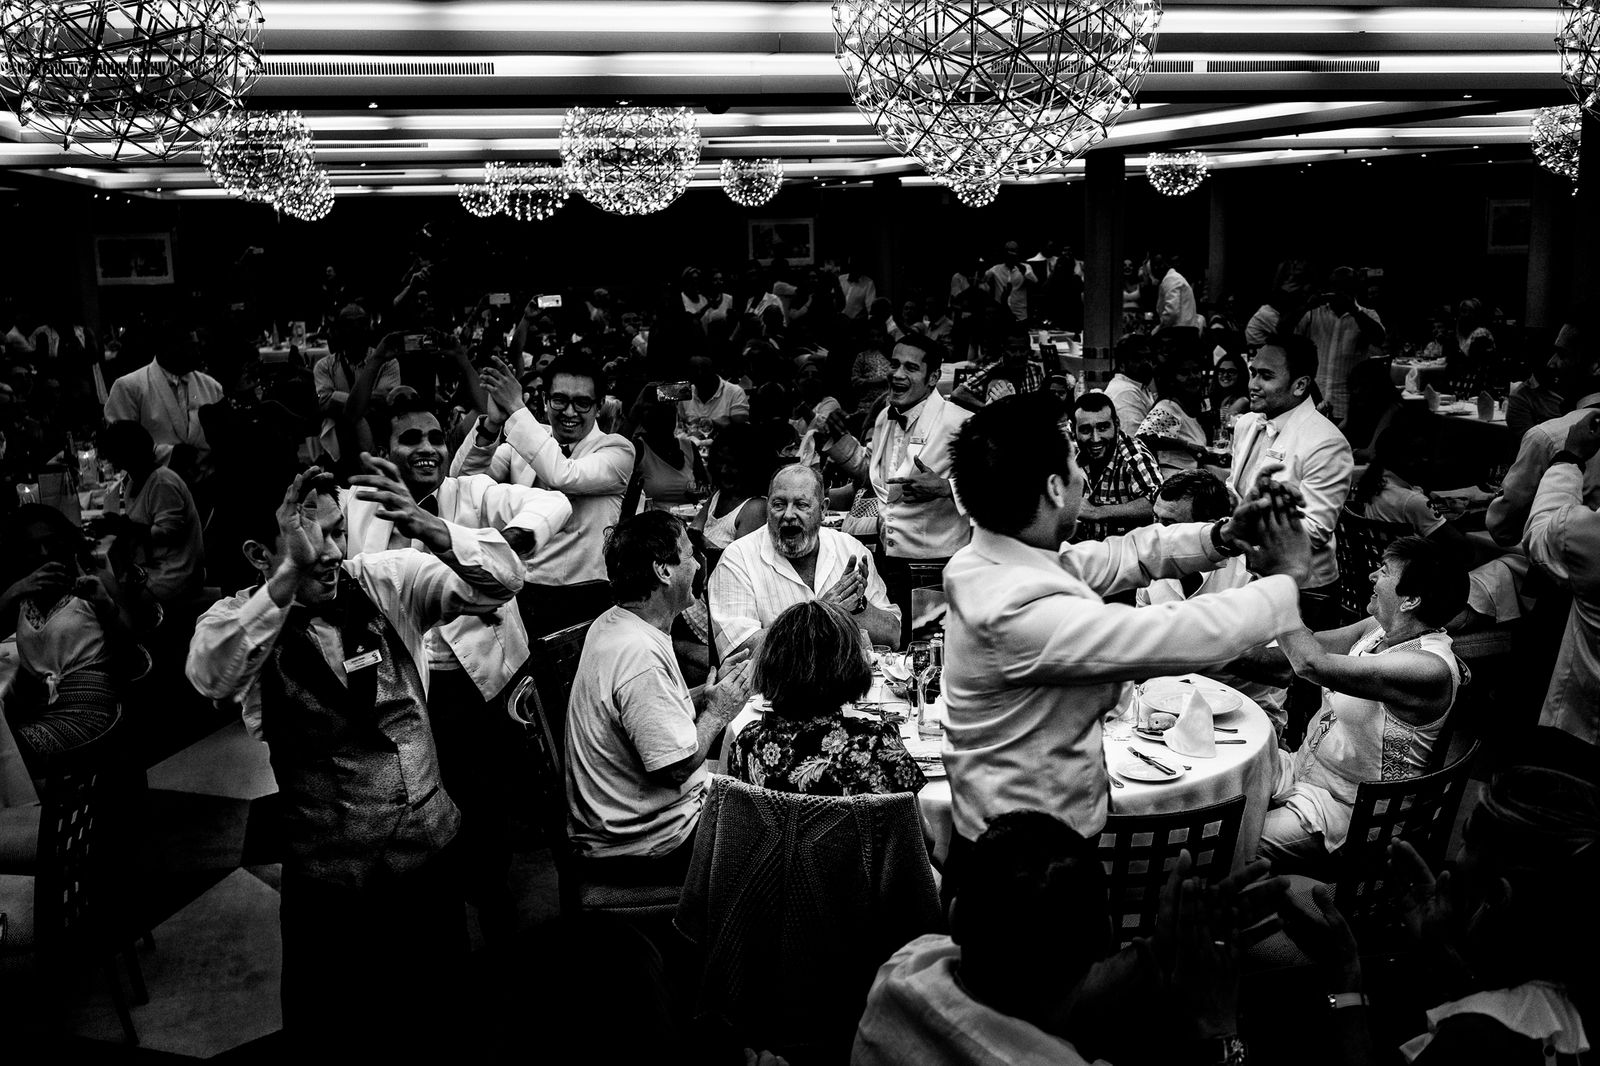 © Simona Bonanno - Waiters dancing around passengers tables during the dinner service. At sea, 2017